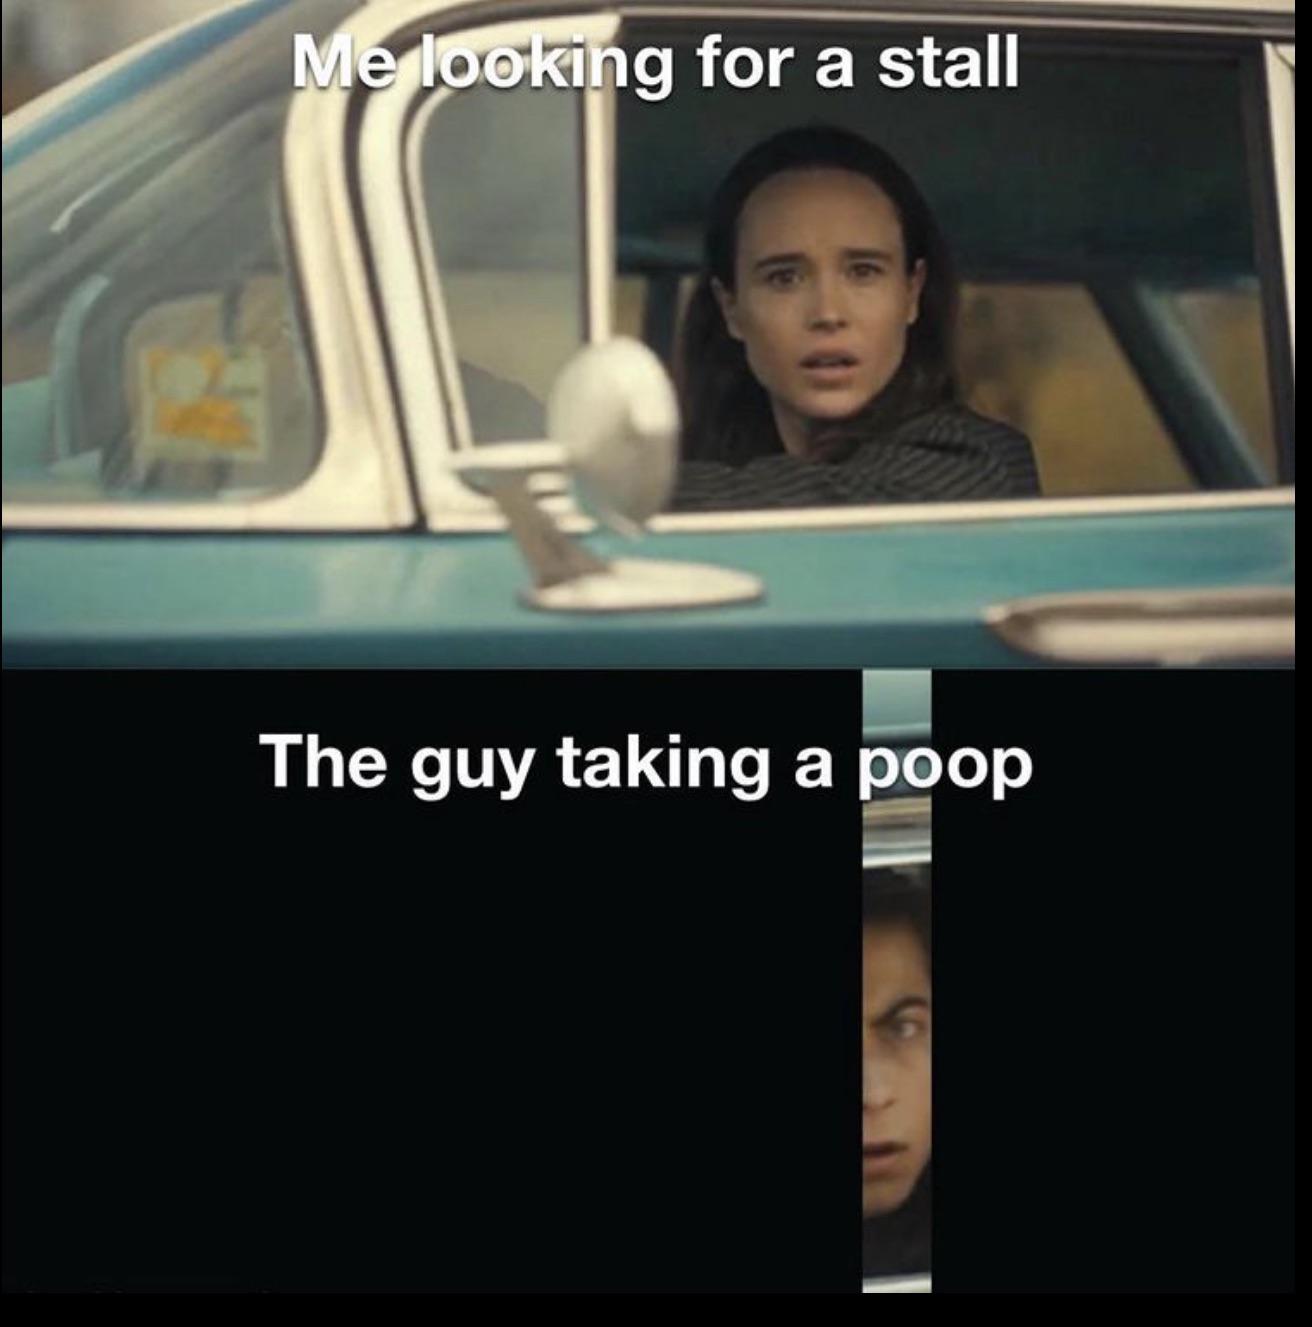 funny memes - dank memes - umbrella academy meme - Me looking for a stall a The guy taking a poop a